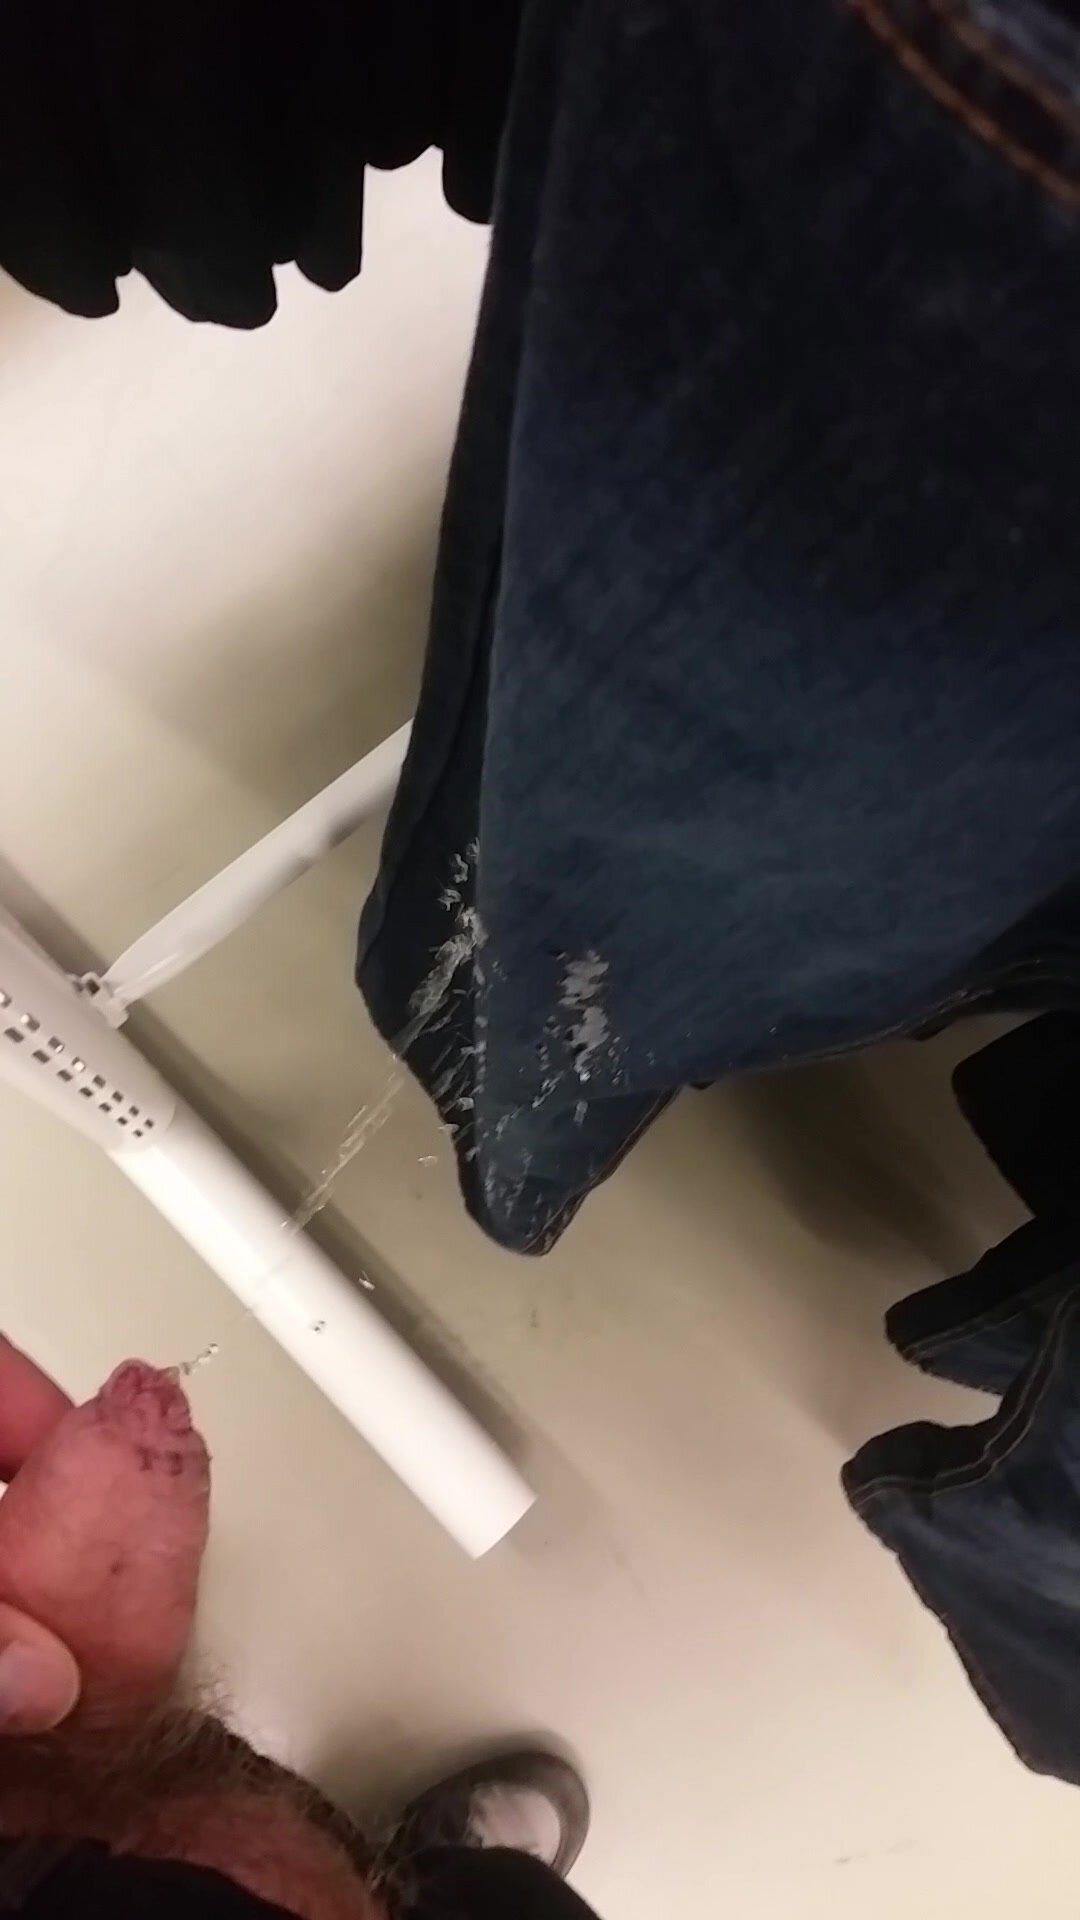 Piss on jeans in store